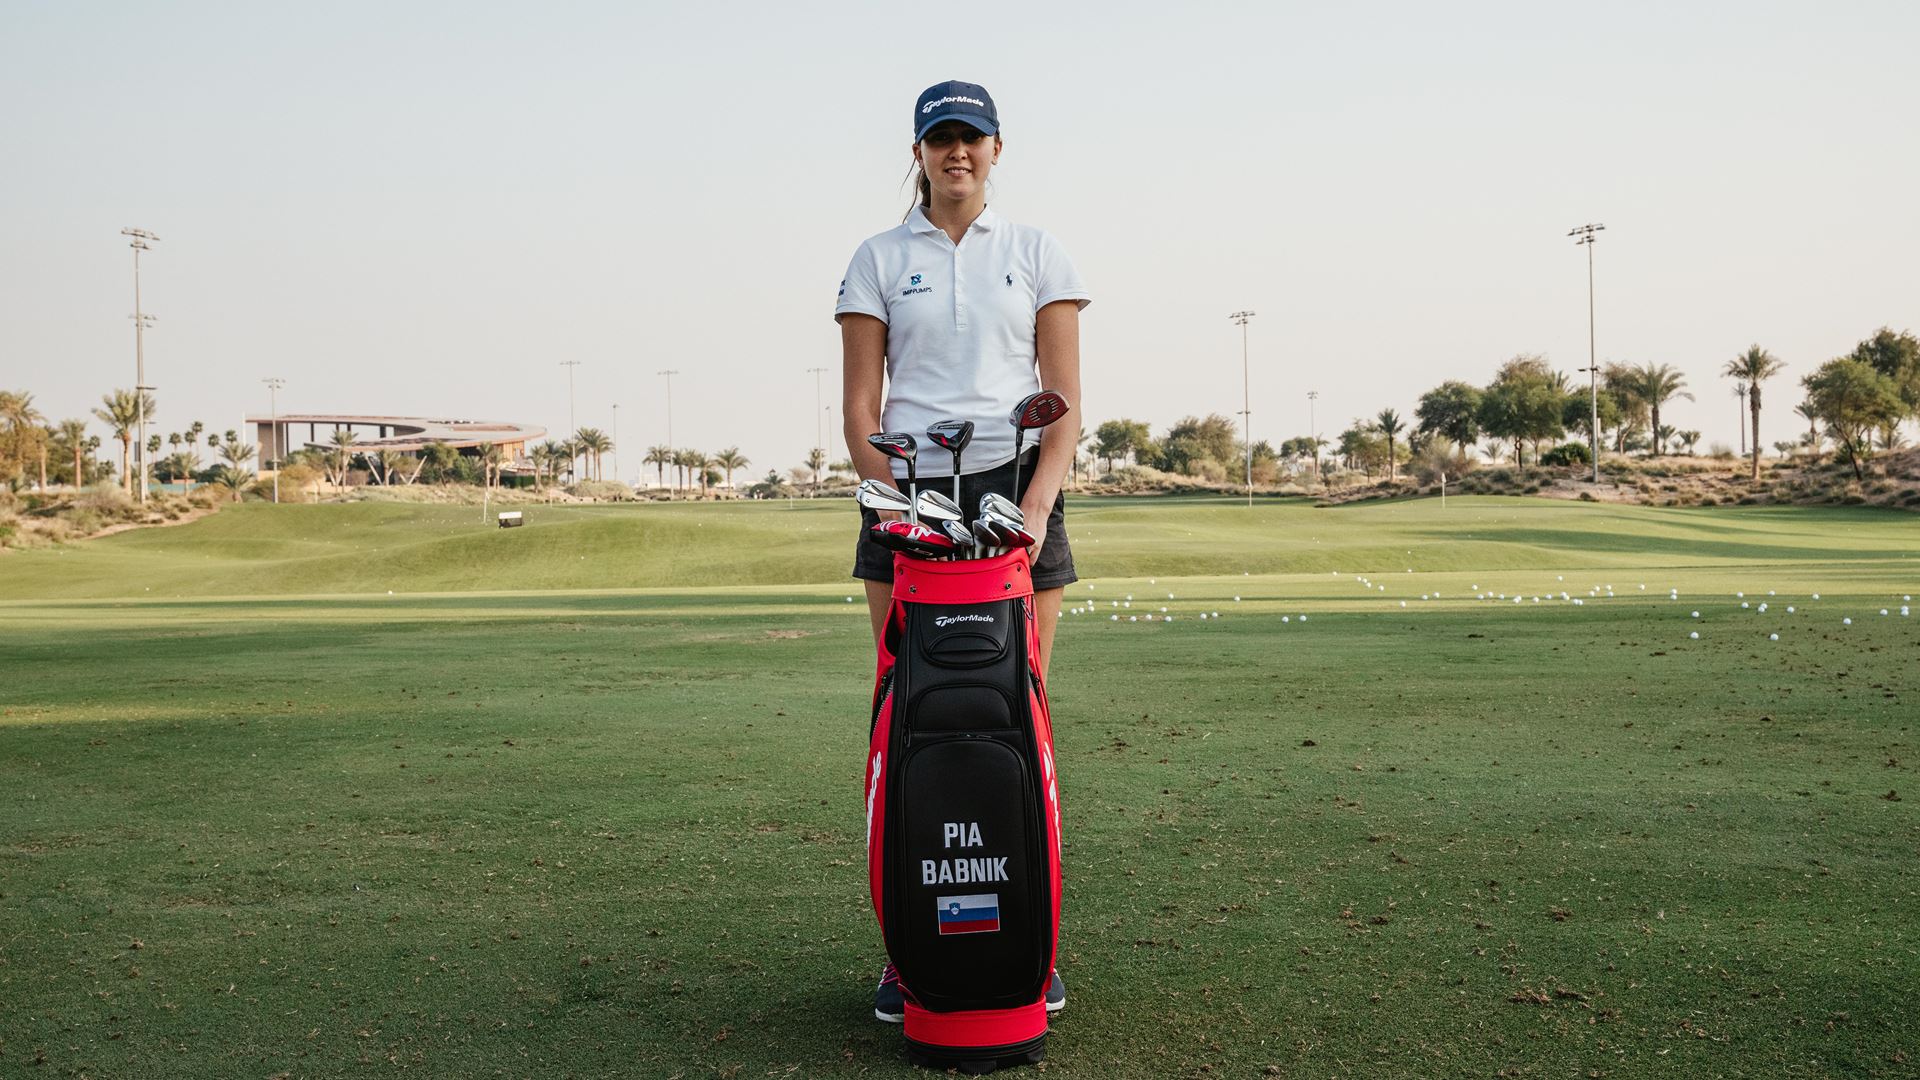 Pia Babnik Joins Team TaylorMade; Choosing To Play a Full Bag of TaylorMade Equipment and Golf Ball